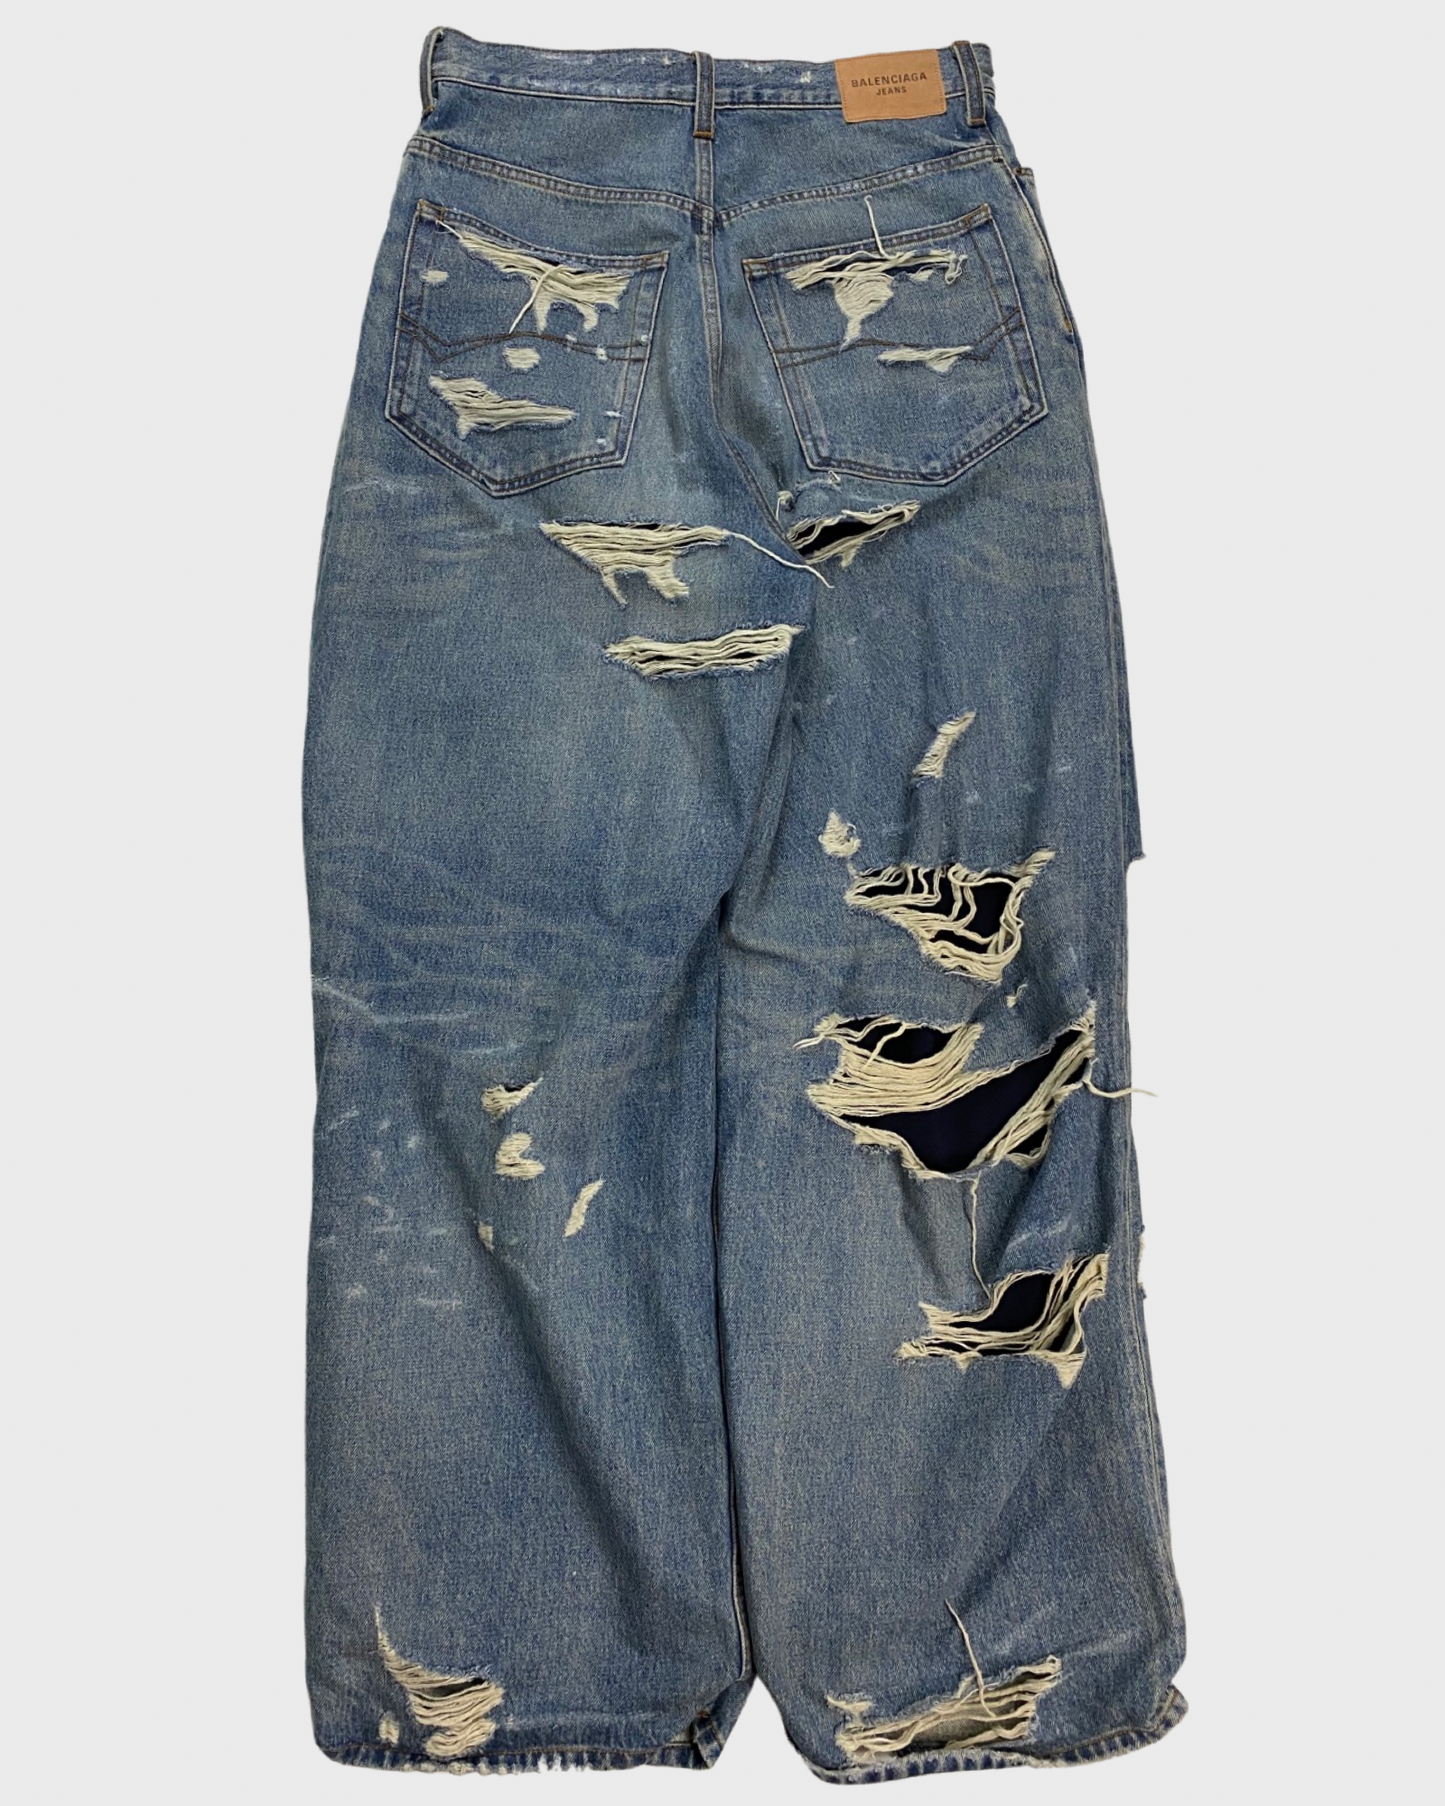 BALENCIAGA AW21 destroyed ripped layered baggy blue jeans SIZE:XS|S